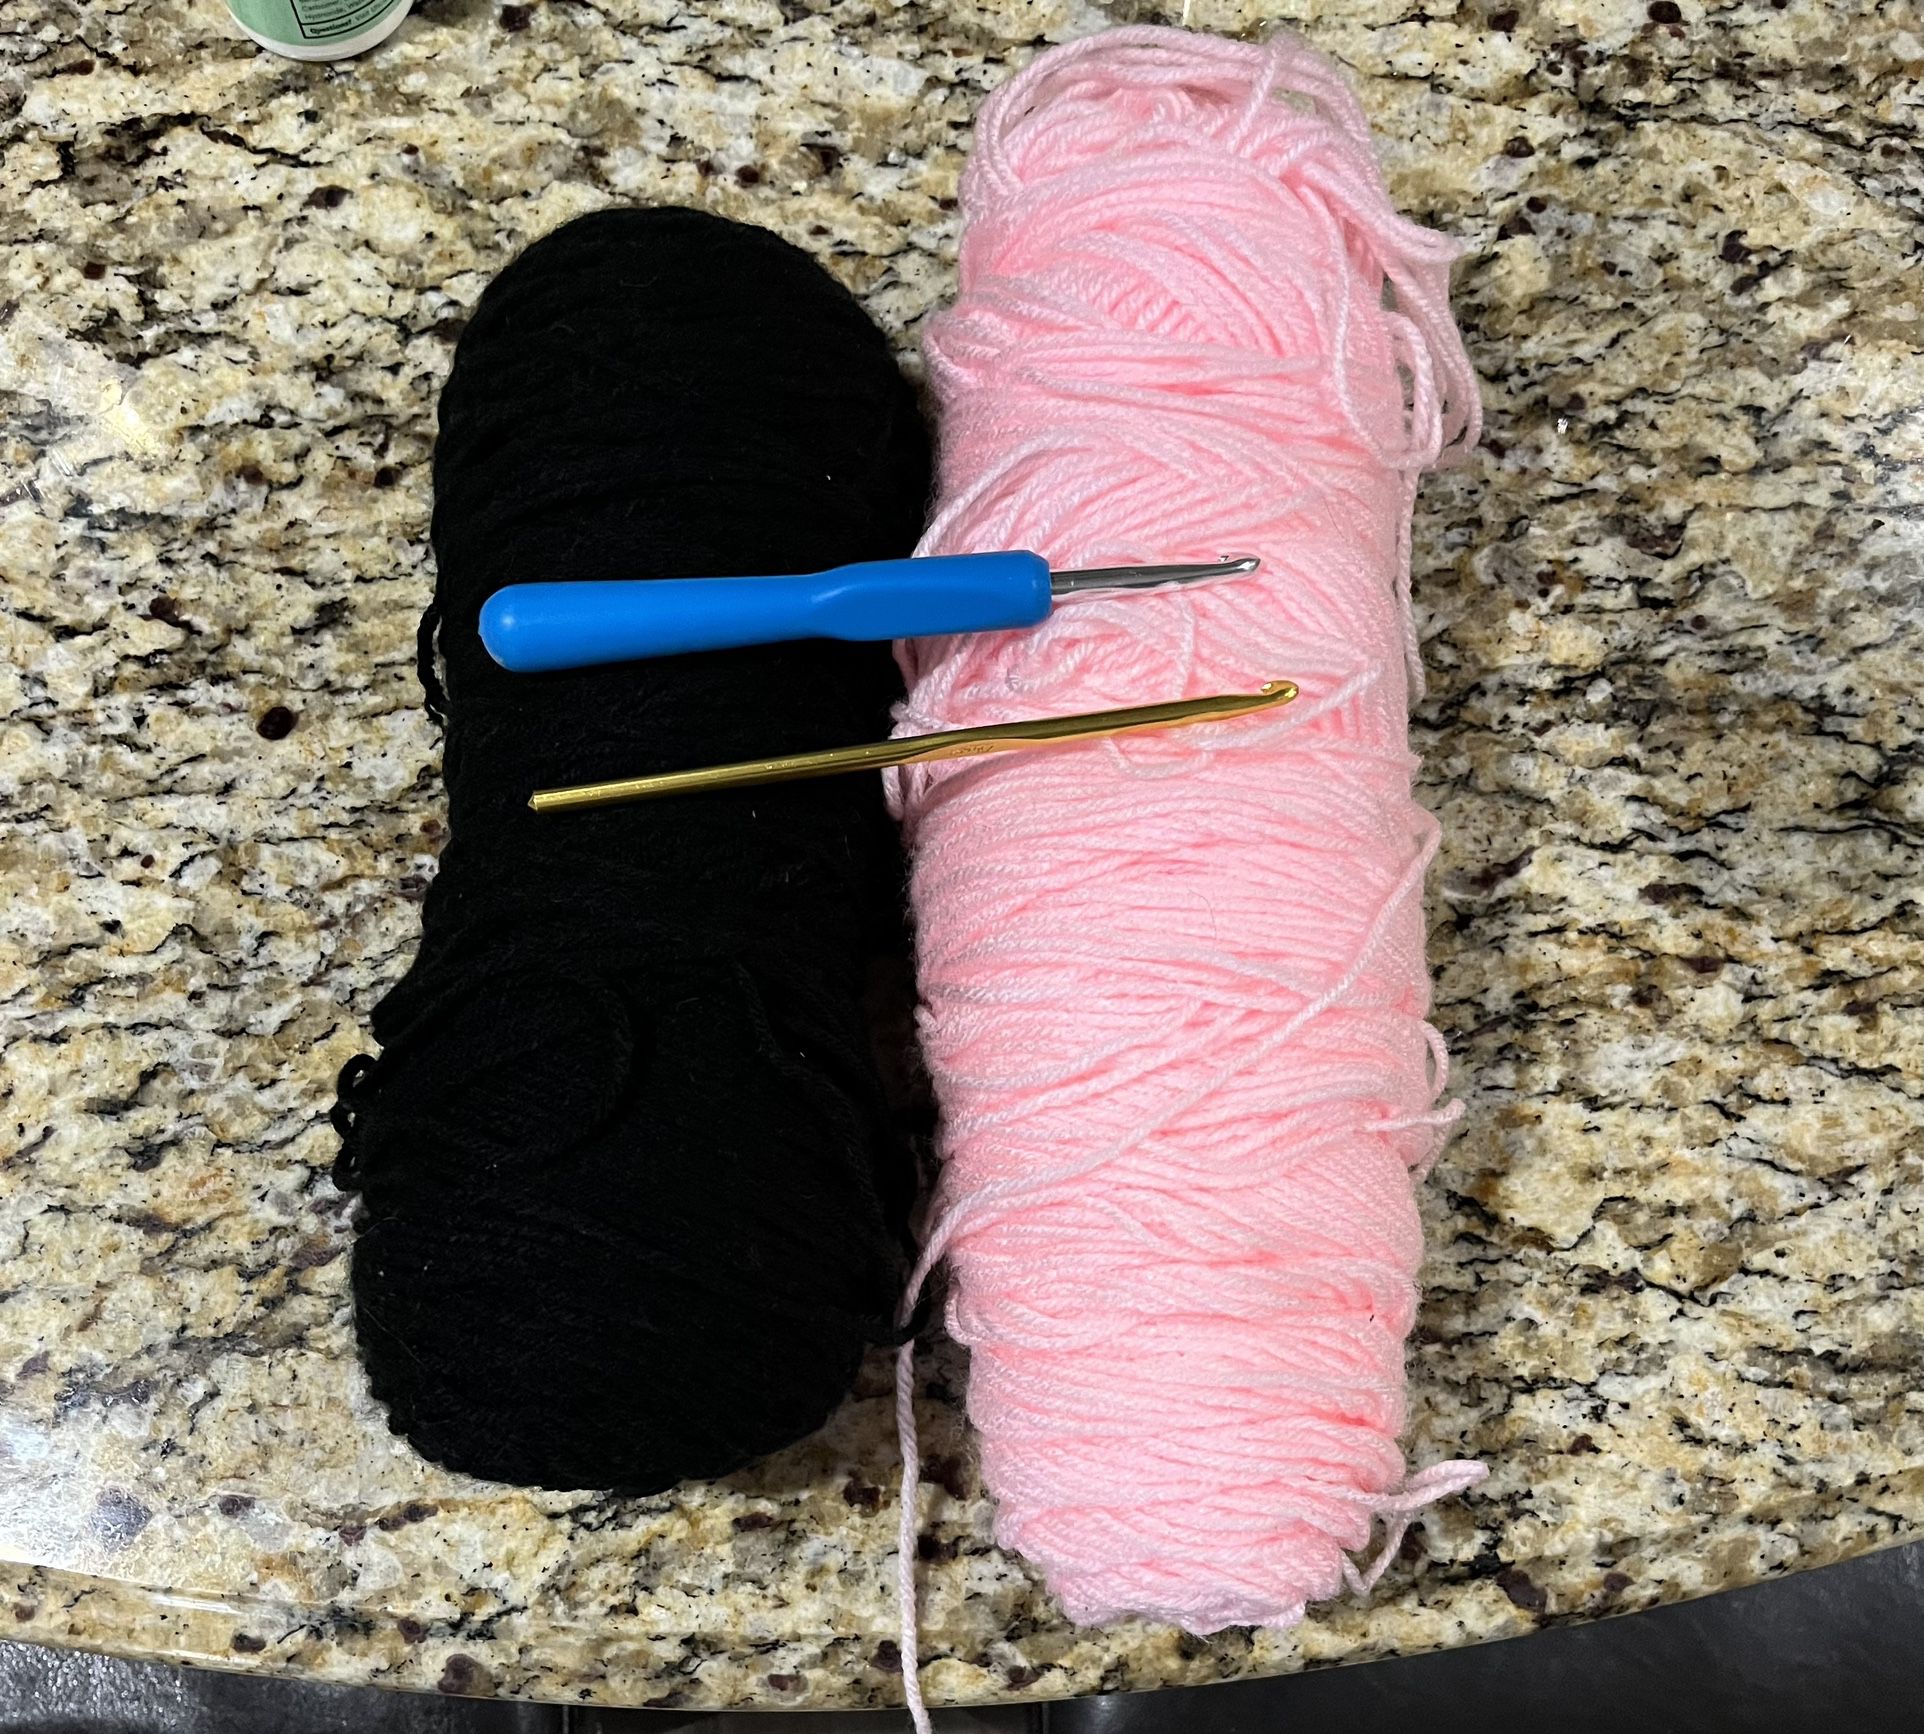 FREE Pink & Black Yarn And 2 Needles For Crochet